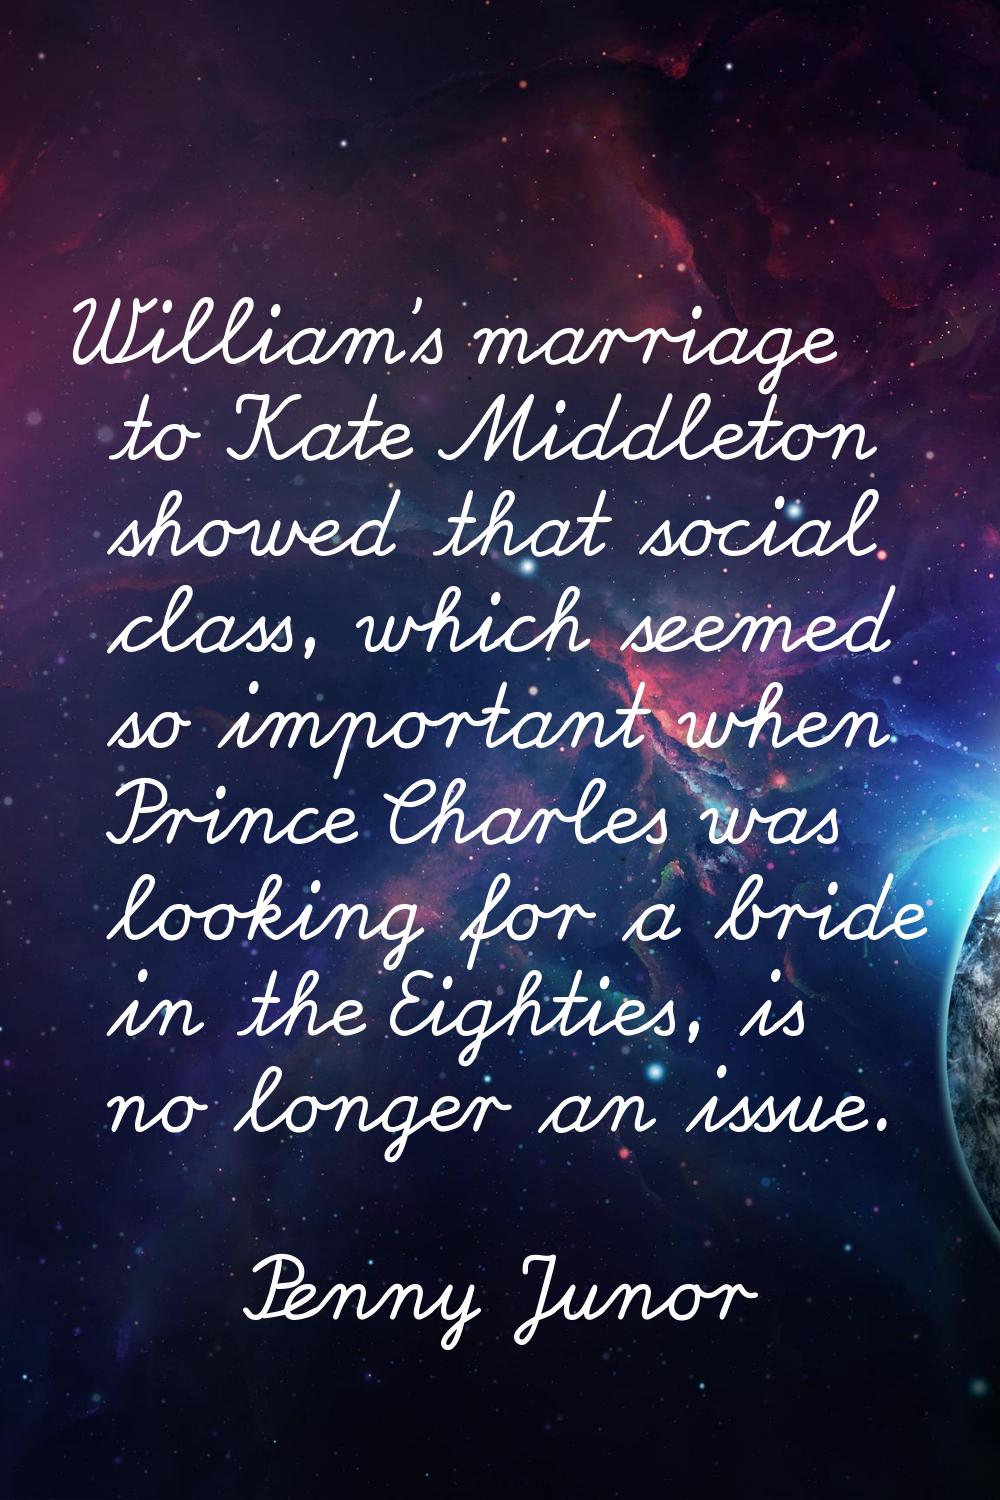 William's marriage to Kate Middleton showed that social class, which seemed so important when Princ